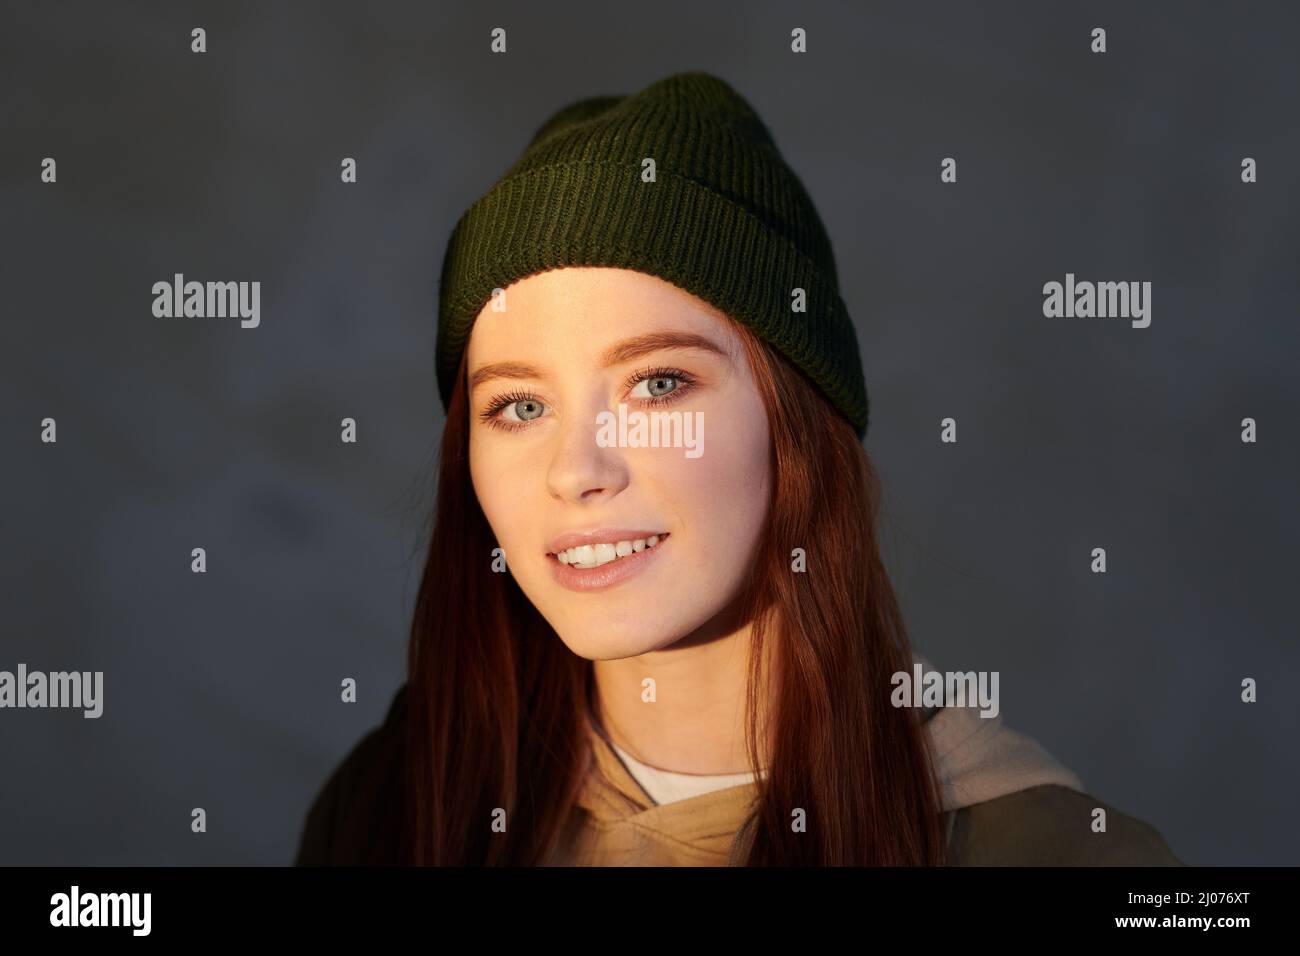 Horizonatal close-up shot of attractive young woman with darl red hair wearing cap smiling at camera, gray background Stock Photo